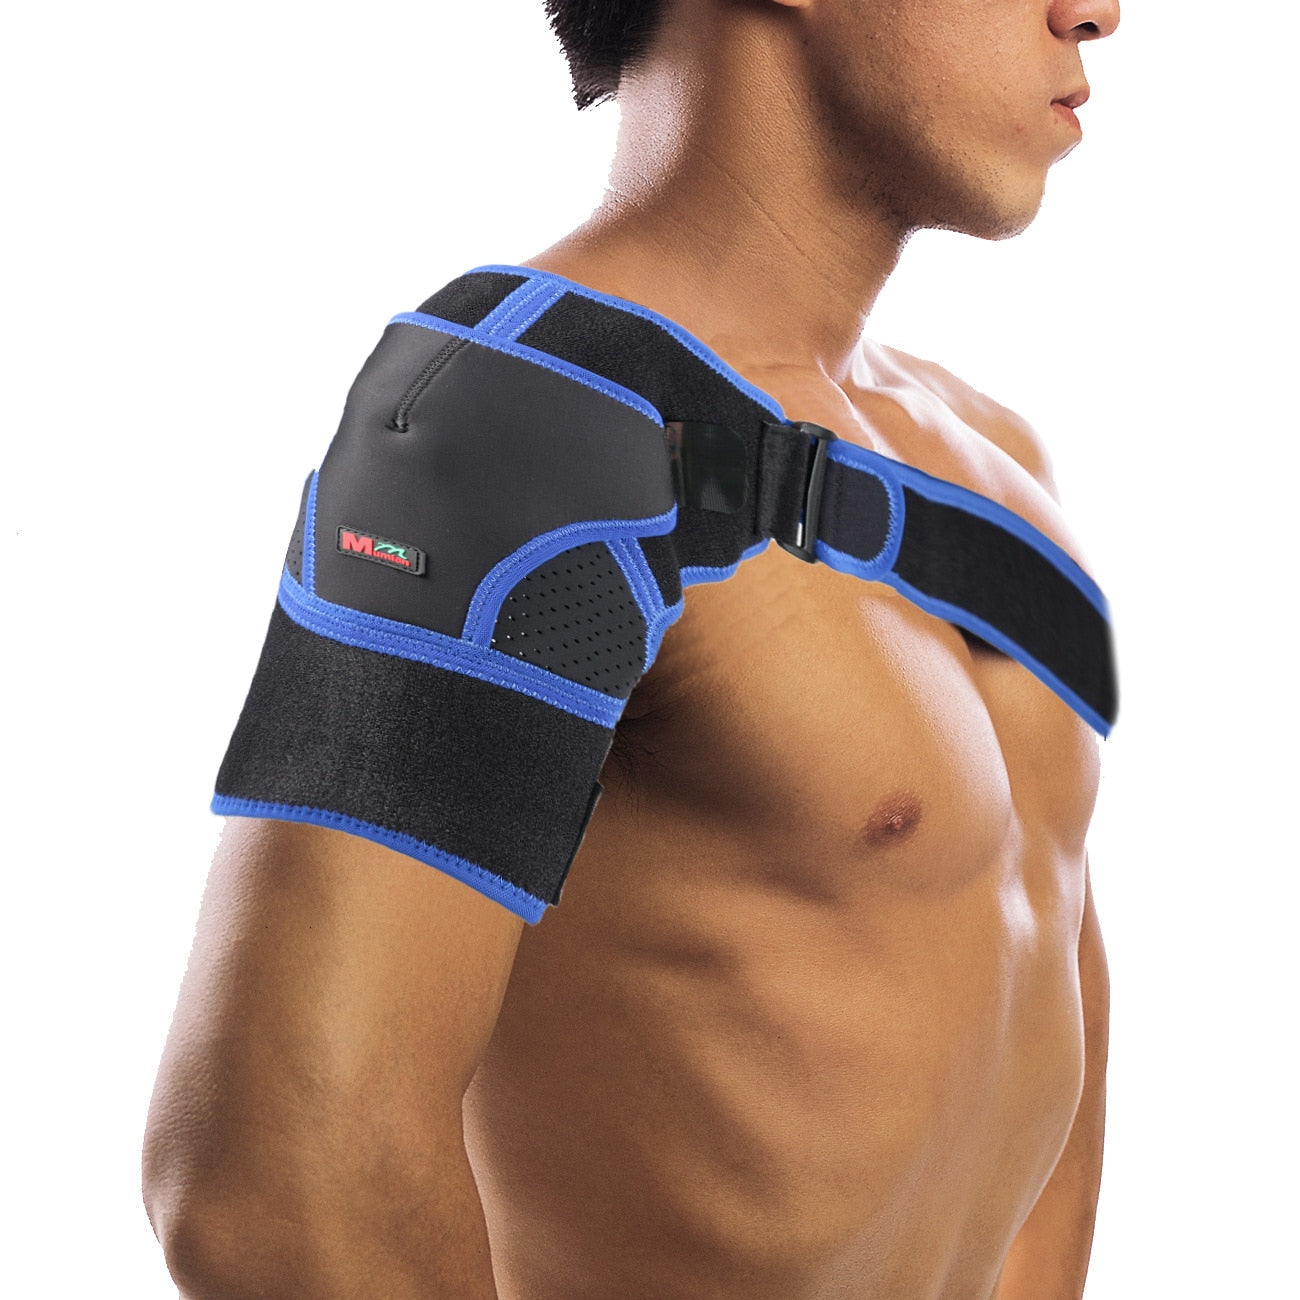 Shoulder Support with Back Brace | Shoulder injury recovery